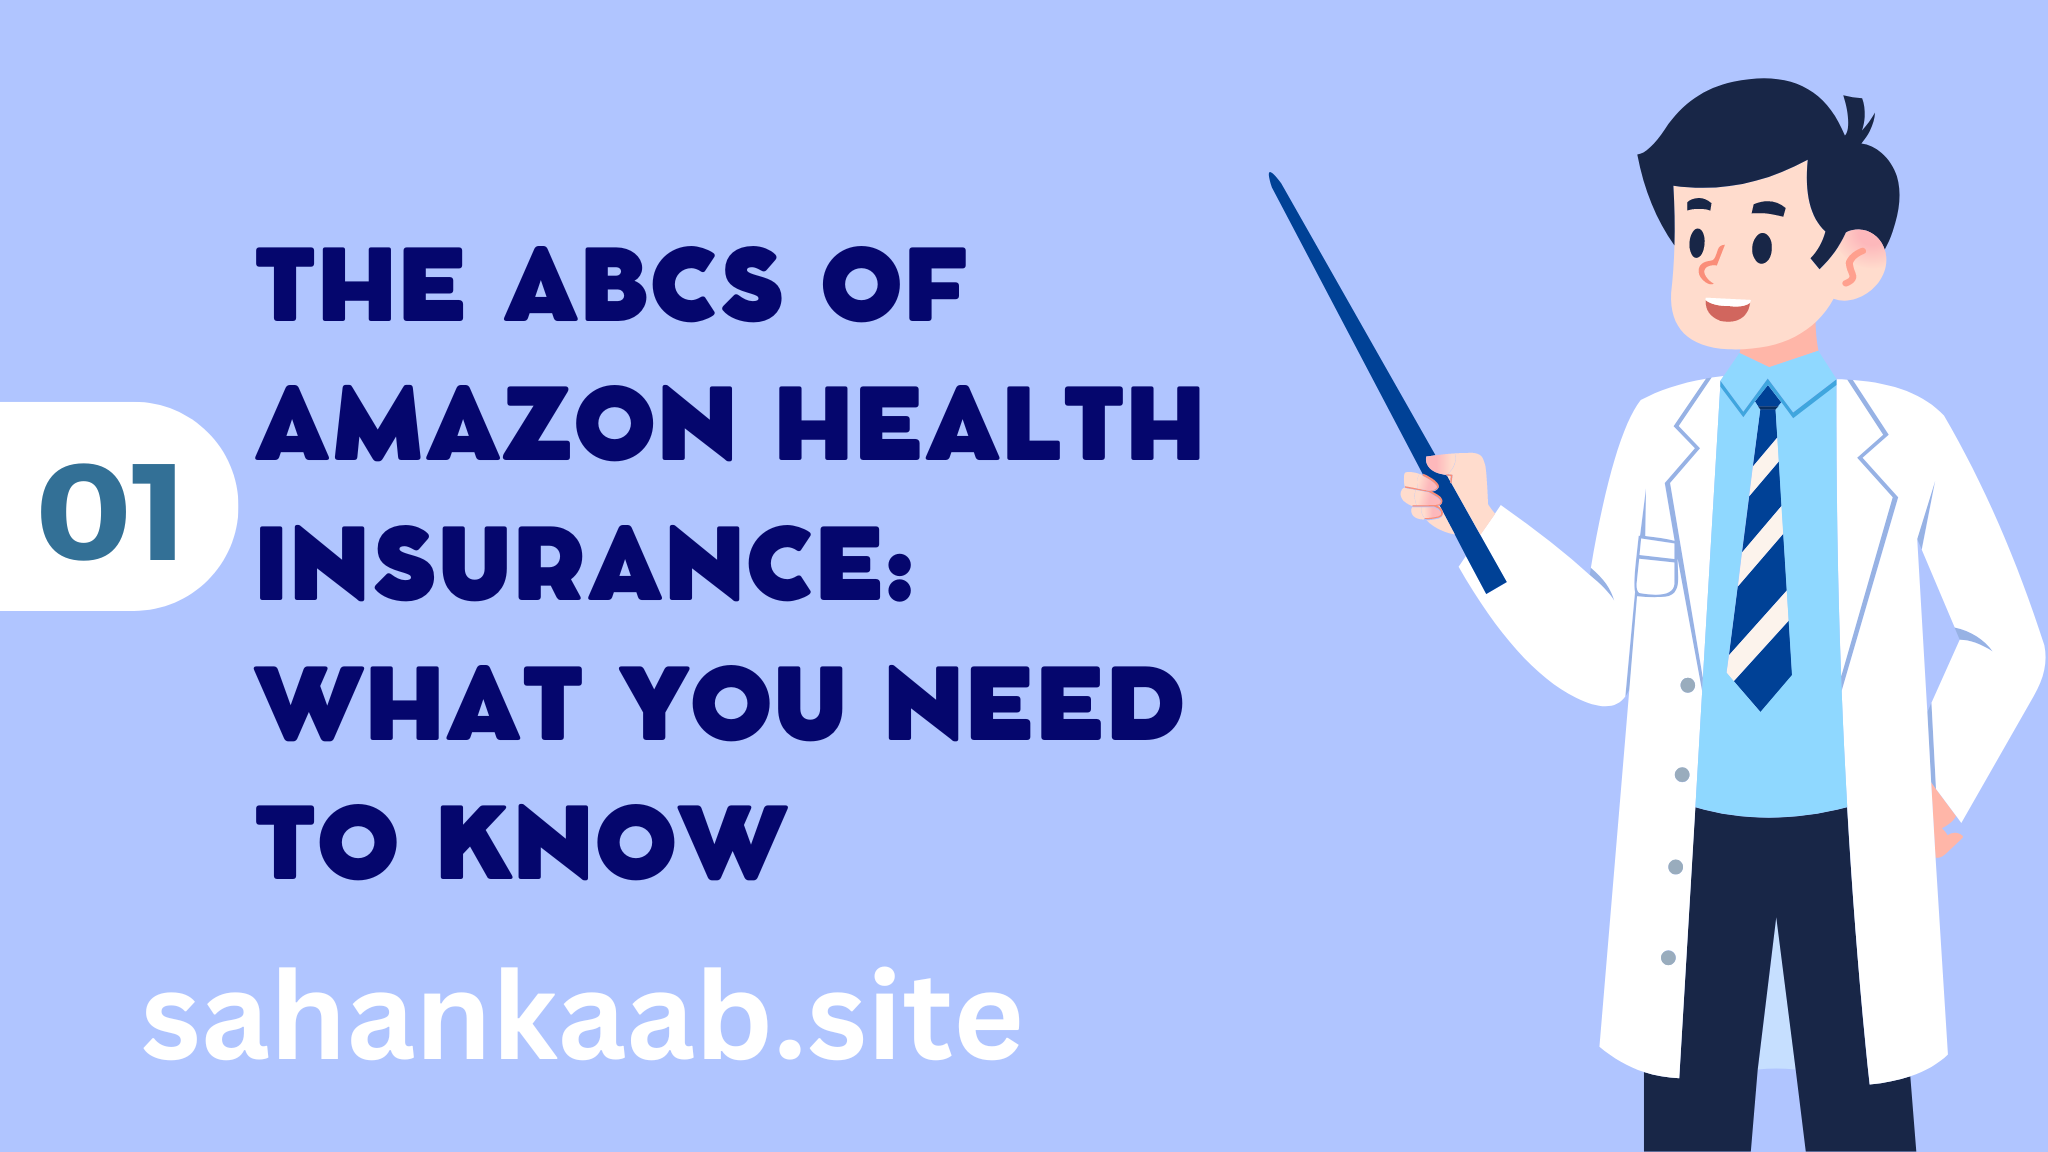 The ABCs of Amazon Health Insurance: What You Need to Know